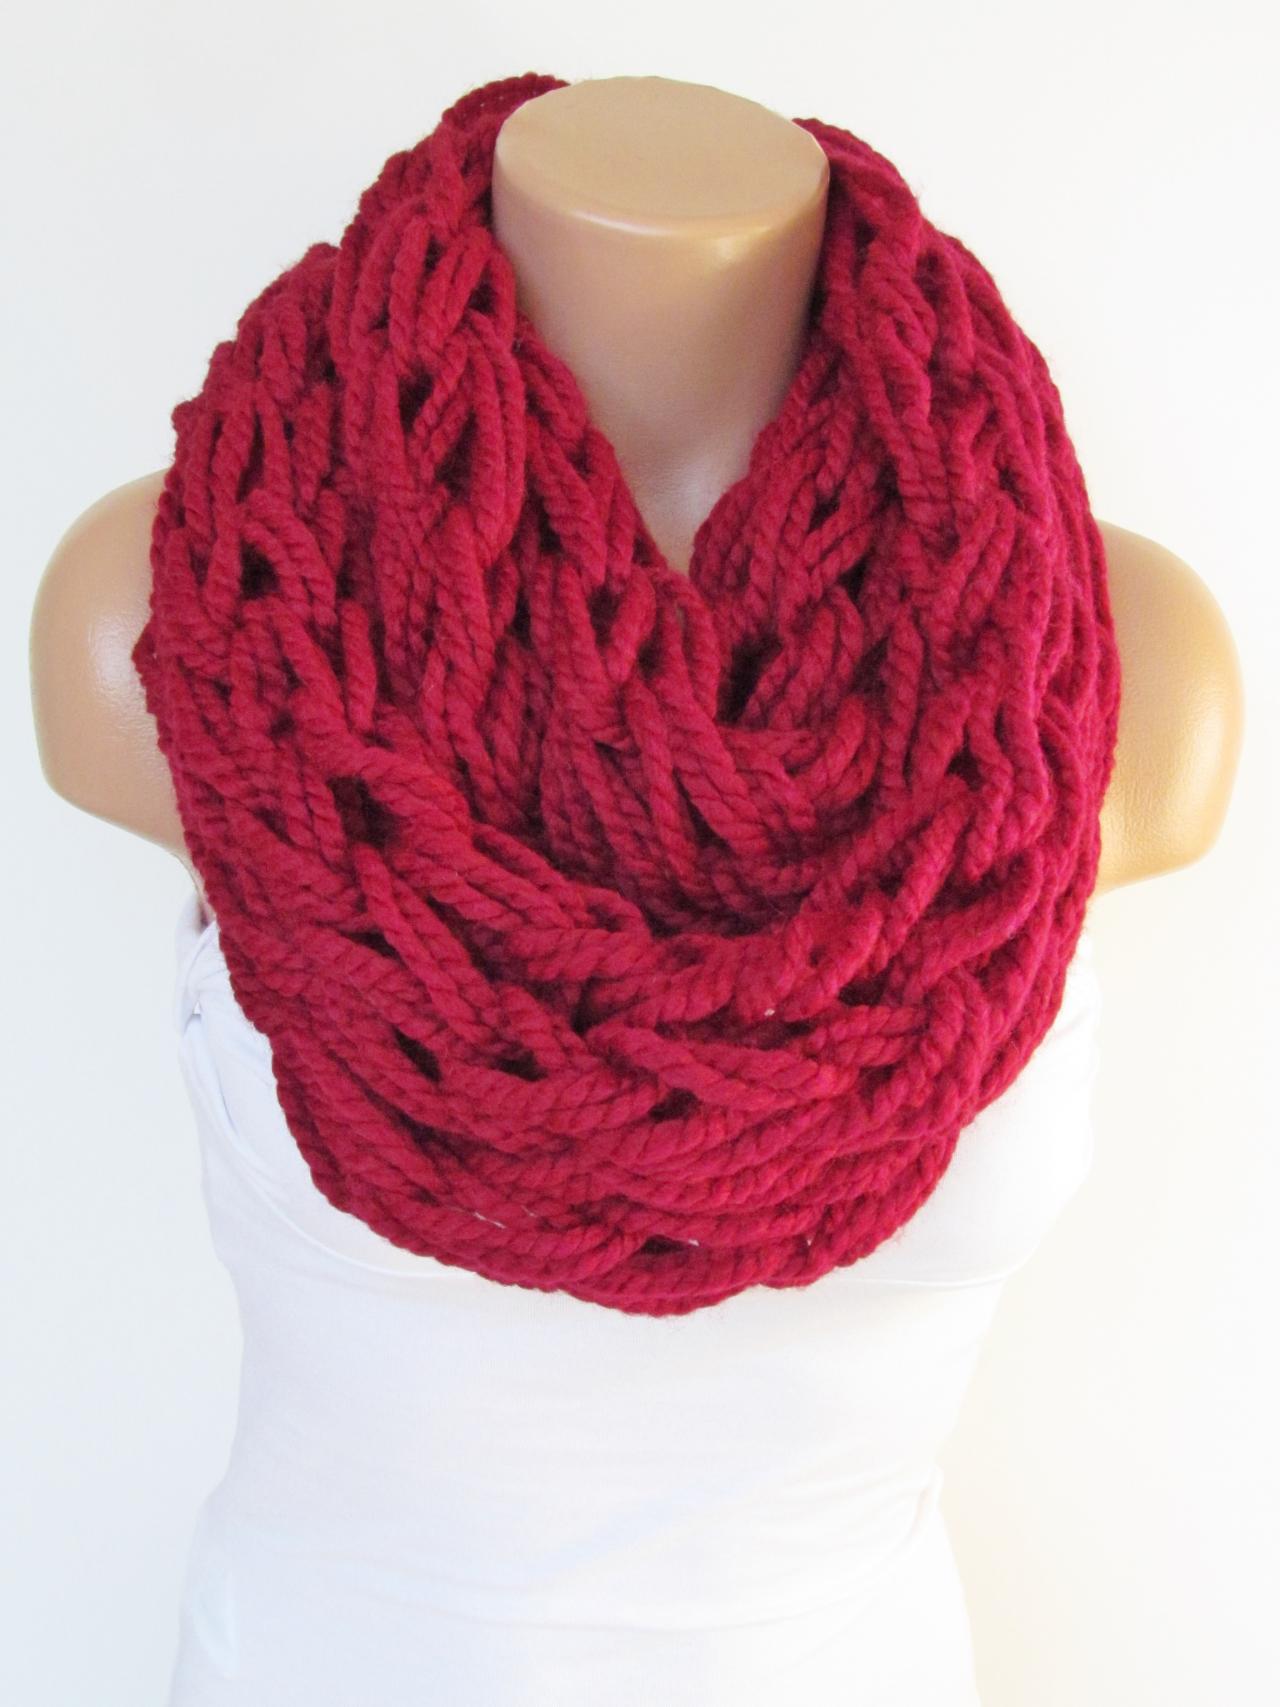 Infinity Red Scarf,Neckwarmer,Knitted Scarf, Circle Loop Scarf, Winter Accessories, Fall Fashion,Chunky Scarf.Cowl Scarf